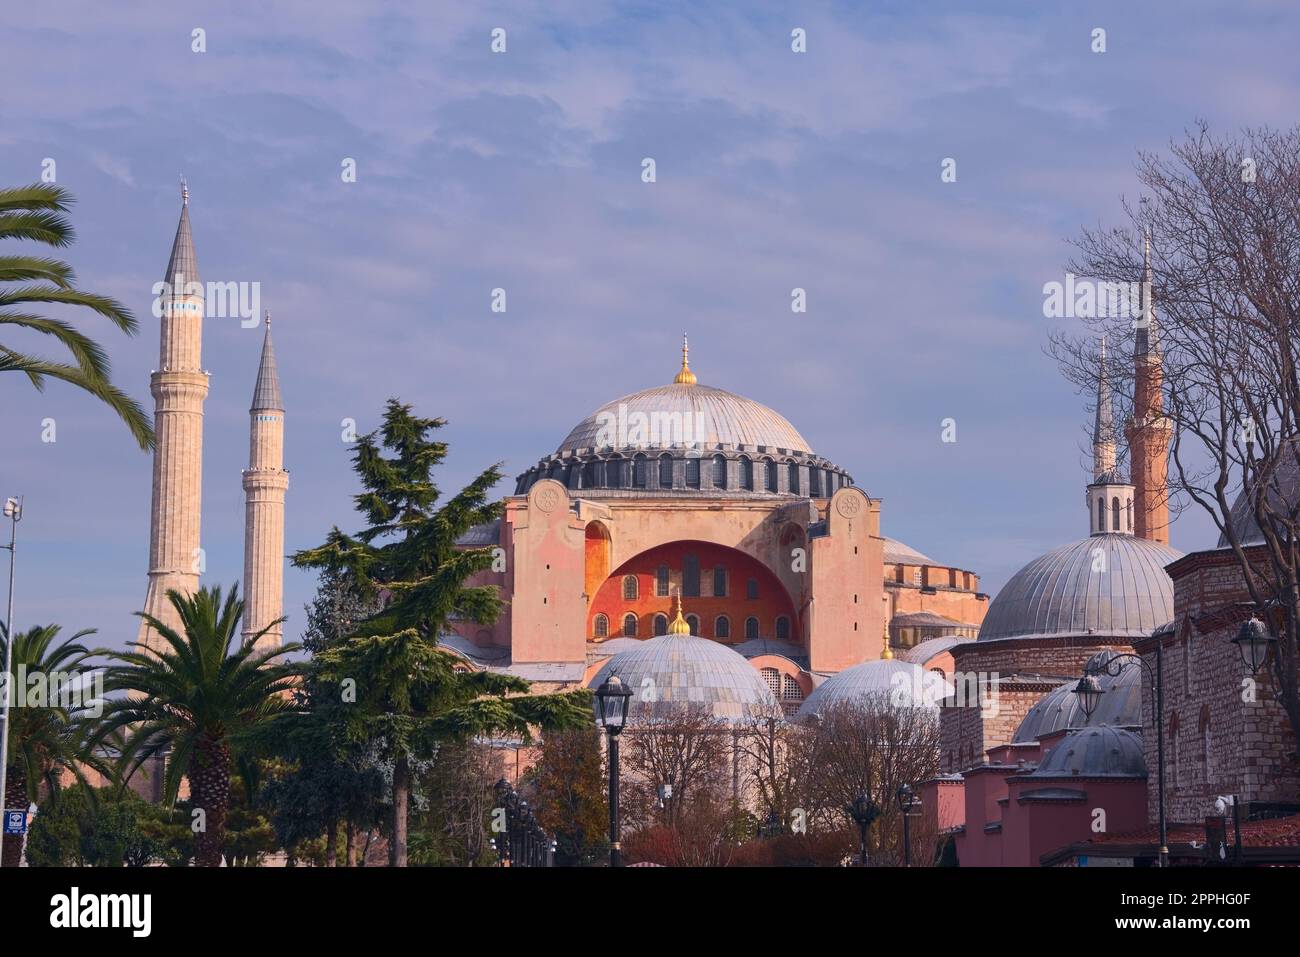 Hagia Sophia, located in Istanbul, Turkey. One the most important religious monuments in the world. Stock Photo